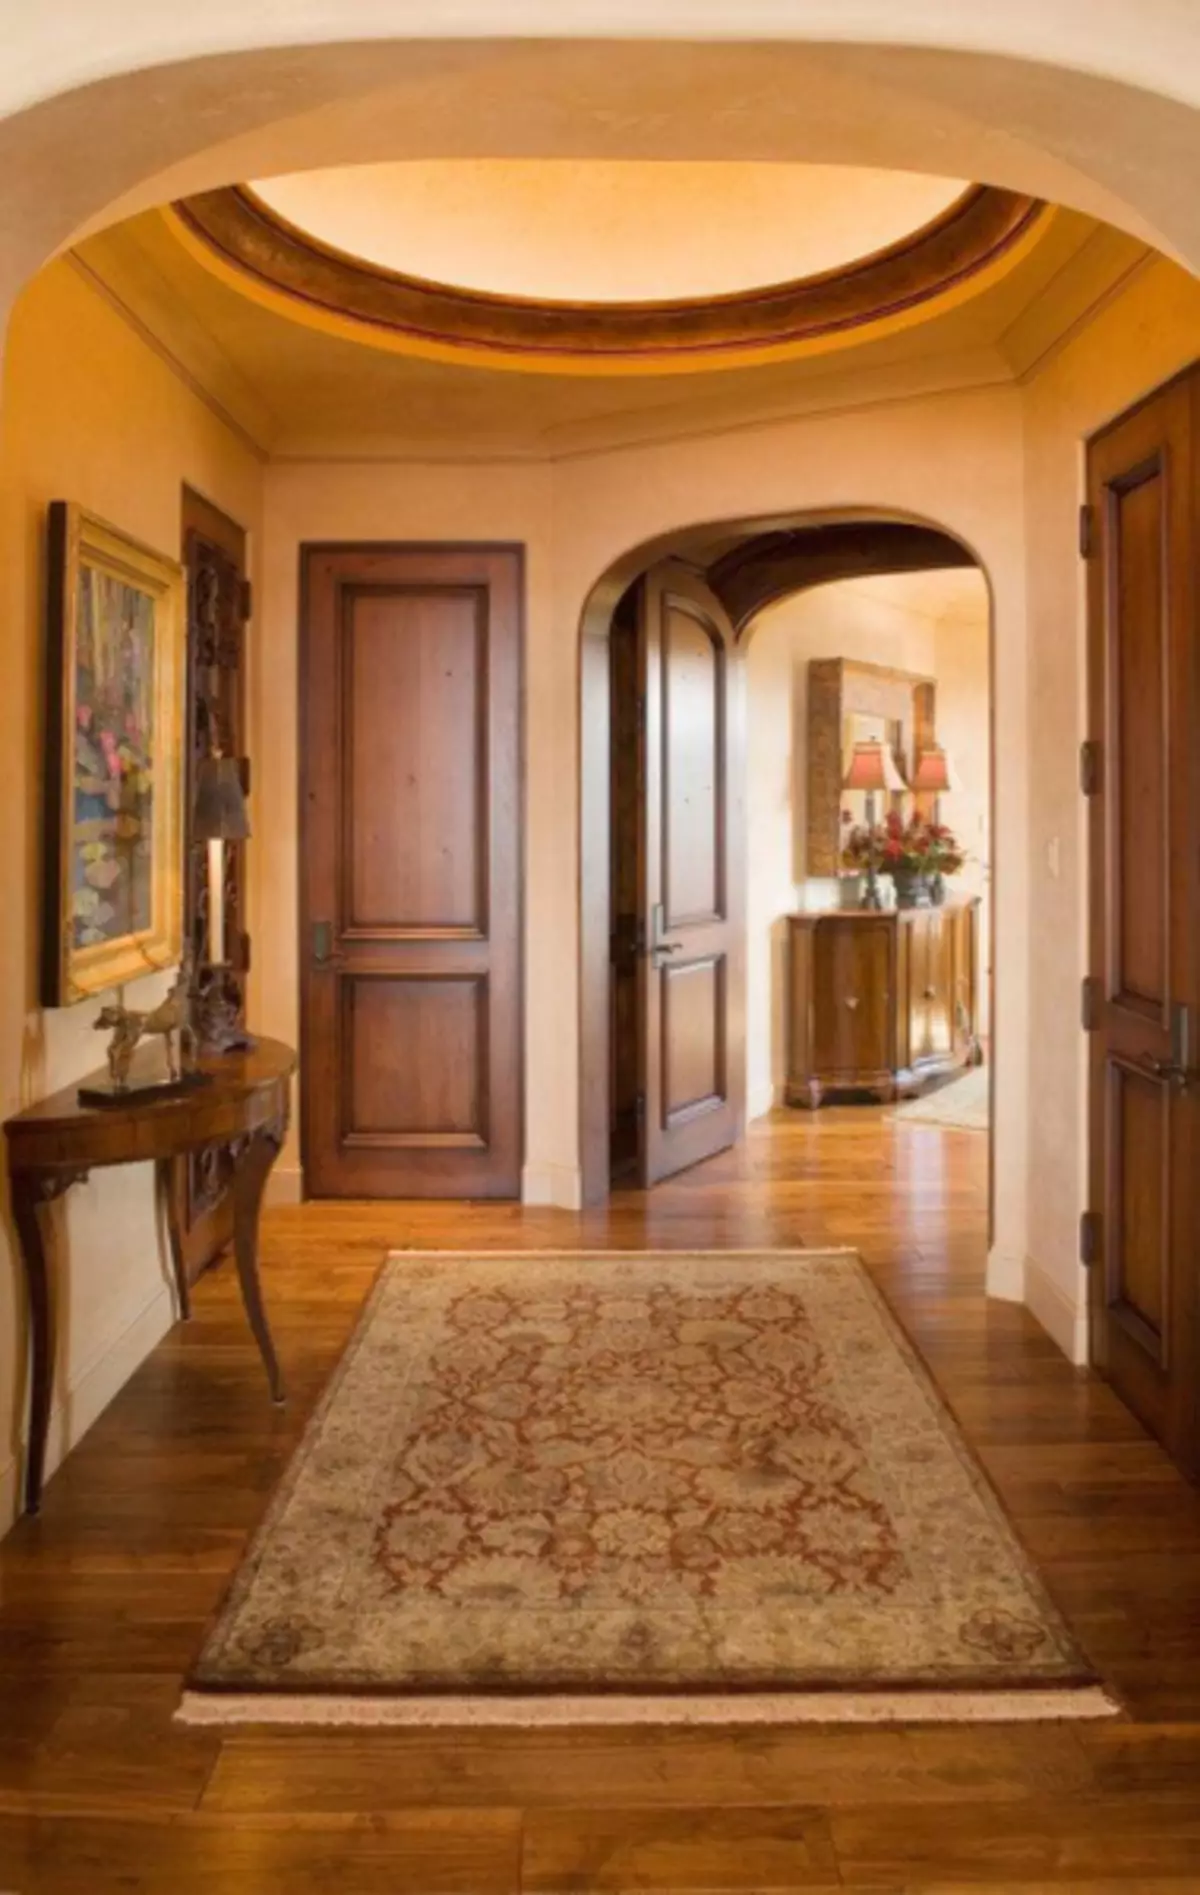 All about doors from DVP: species, features, application